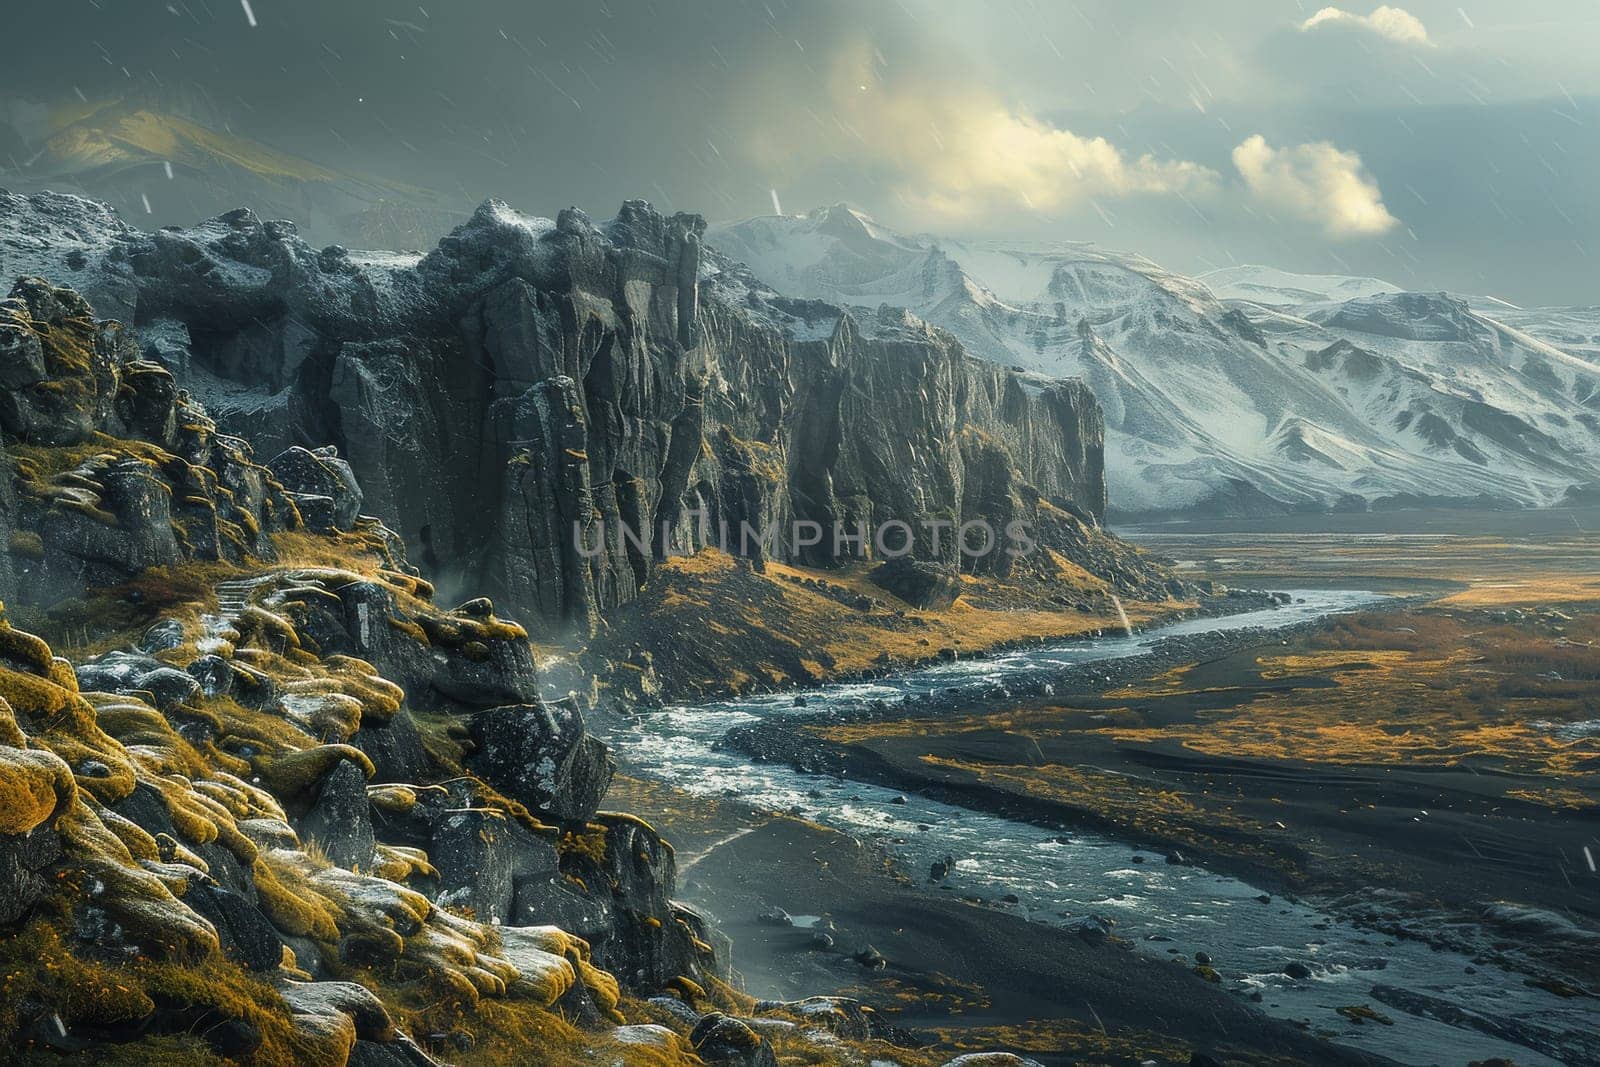 A mountain range with a river running through it. The mountains are covered in snow and the river is frozen. The scene is serene and peaceful, with the snow-covered mountains